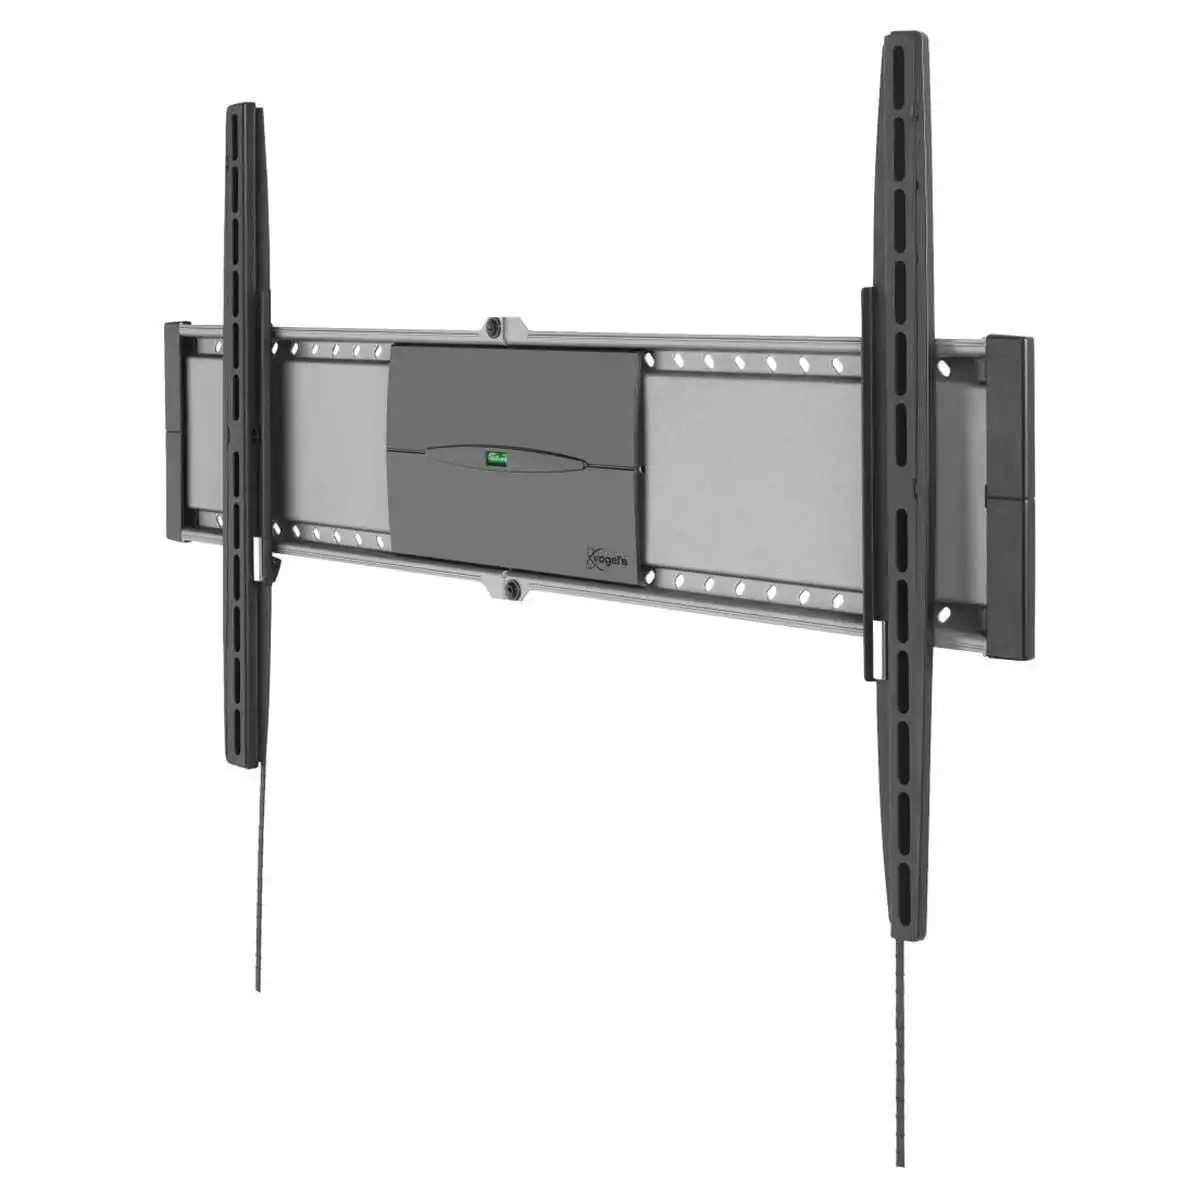 Vogel's Fixed Wall Mount for 40 to 80 Inch TVs Black